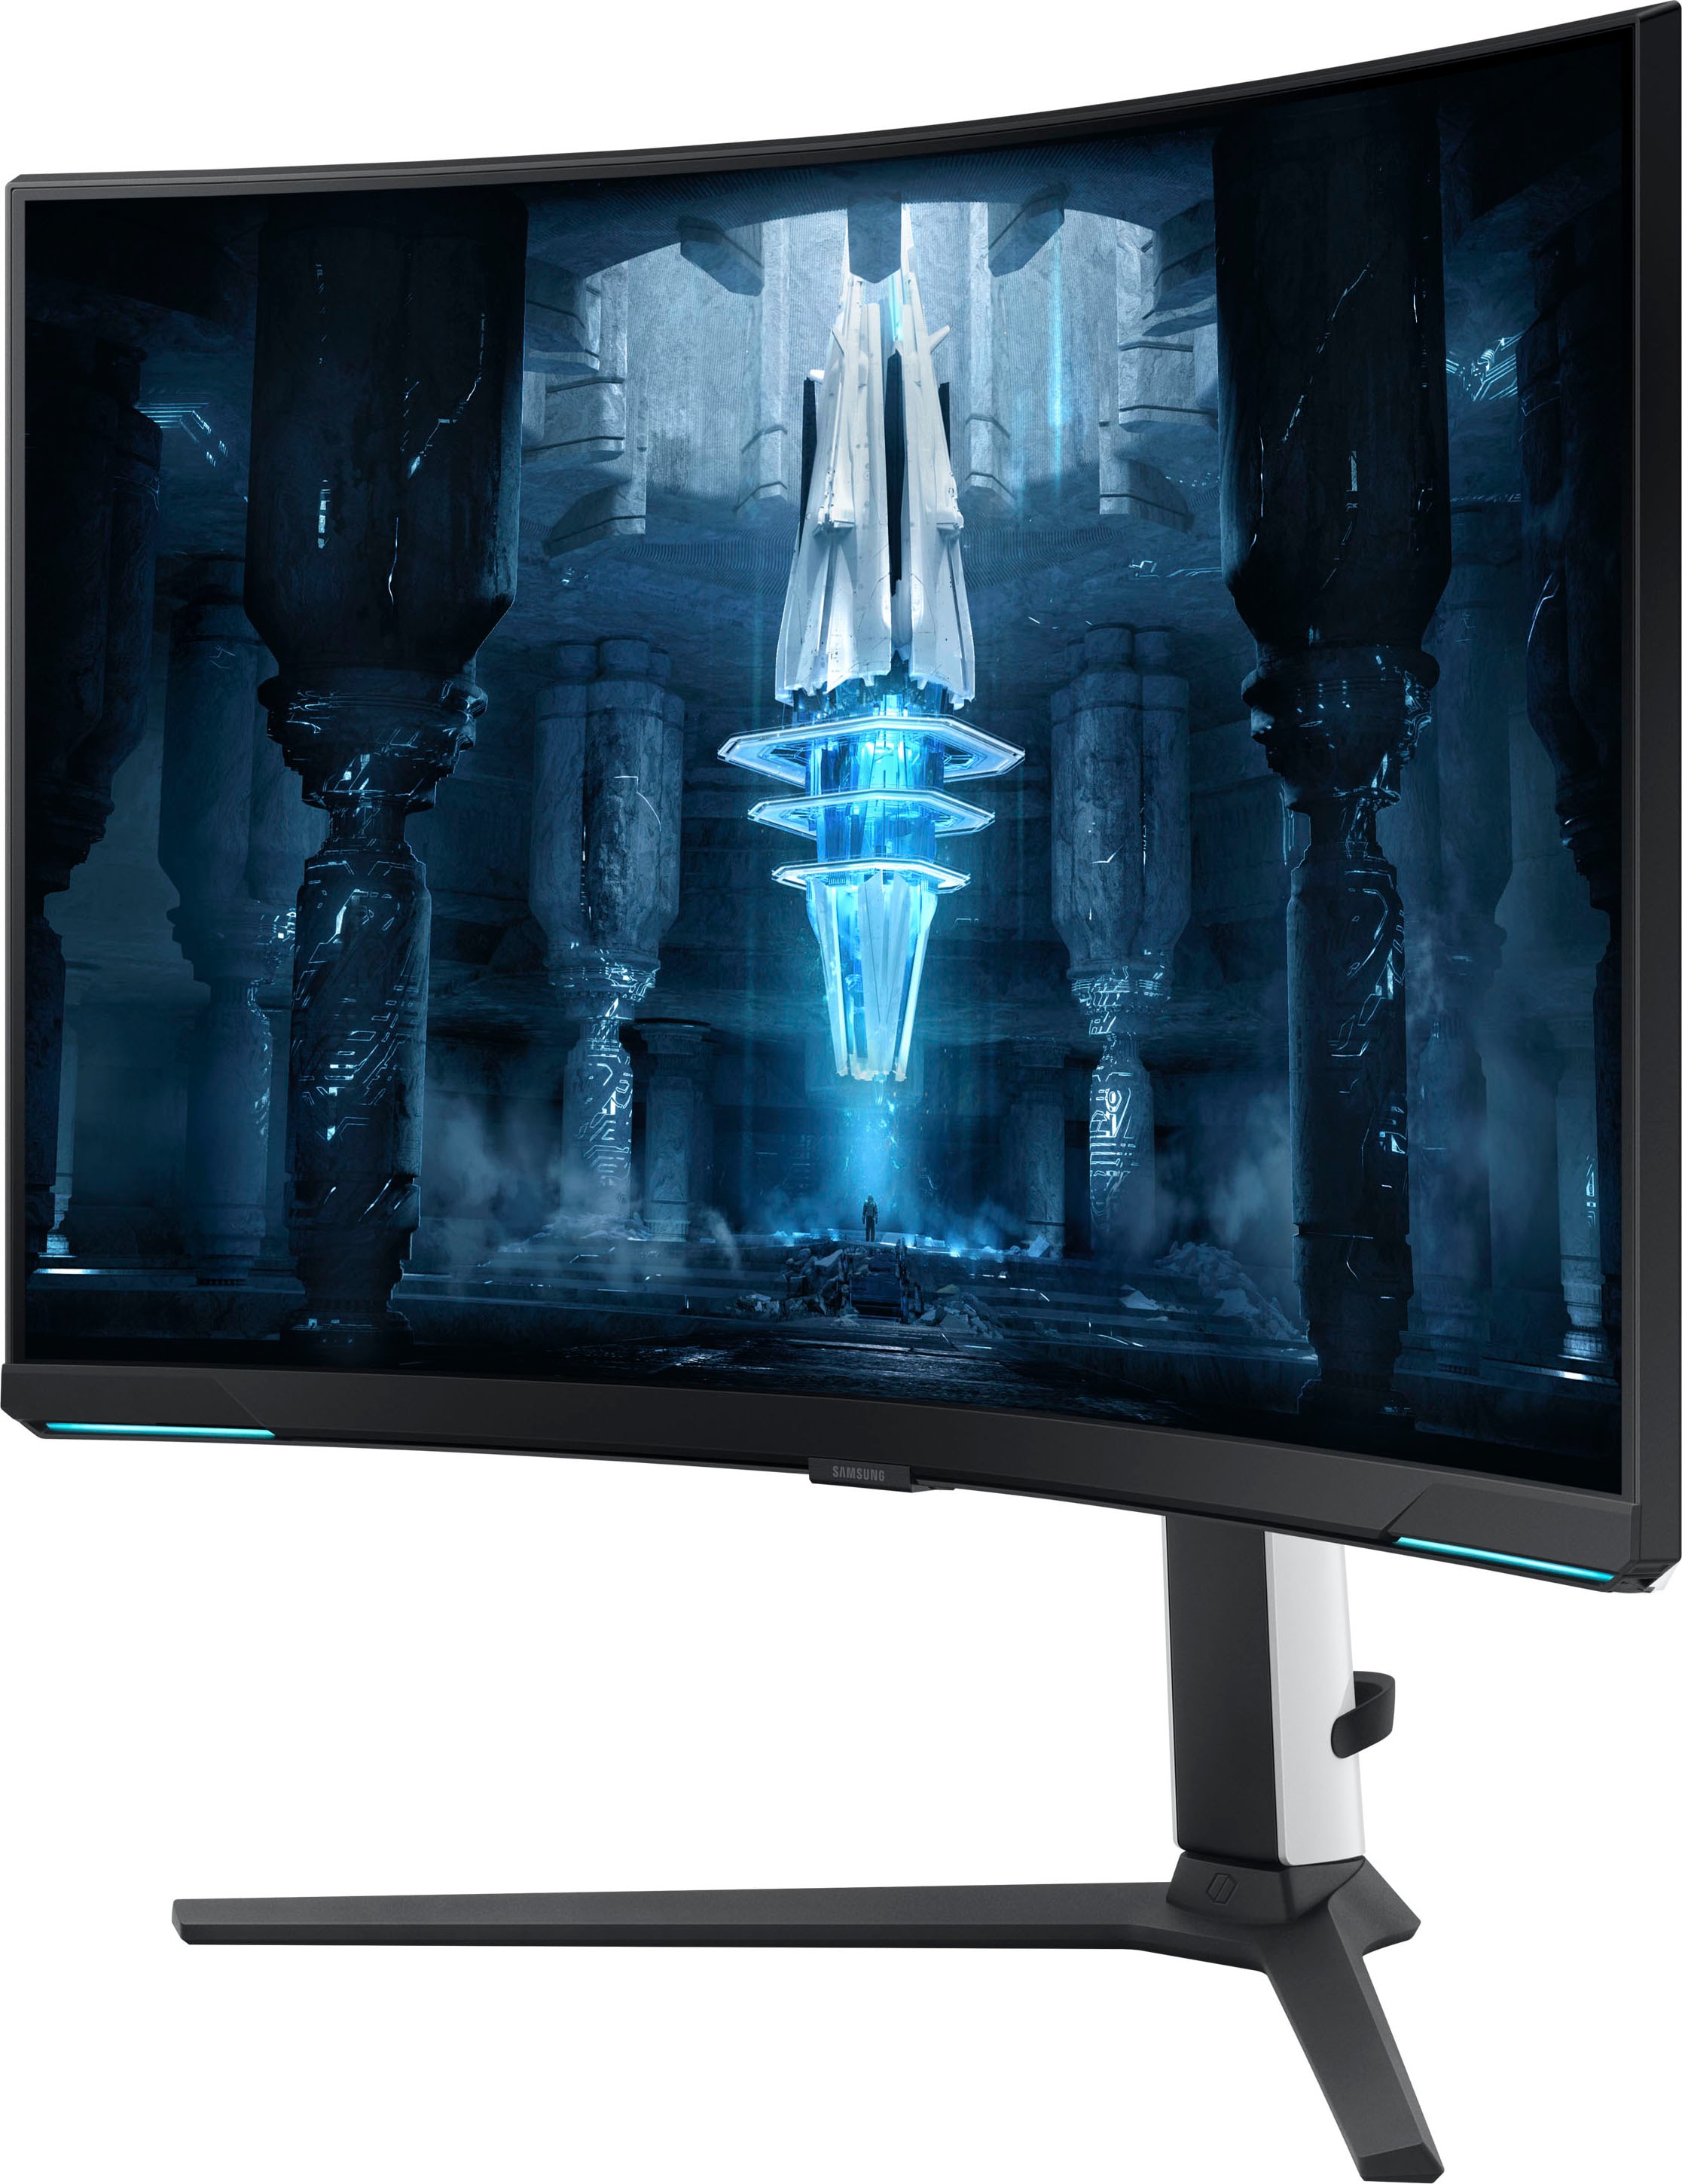 cm/32 1ms Zoll, Neo 165 (G/G) 4K G8 Hz, S32BG850NP«, Reaktionszeit, Ultra bei px, 2160 3840 ms 81 Curved-Gaming-LED-Monitor »Odyssey OTTO HD, 1 x Samsung